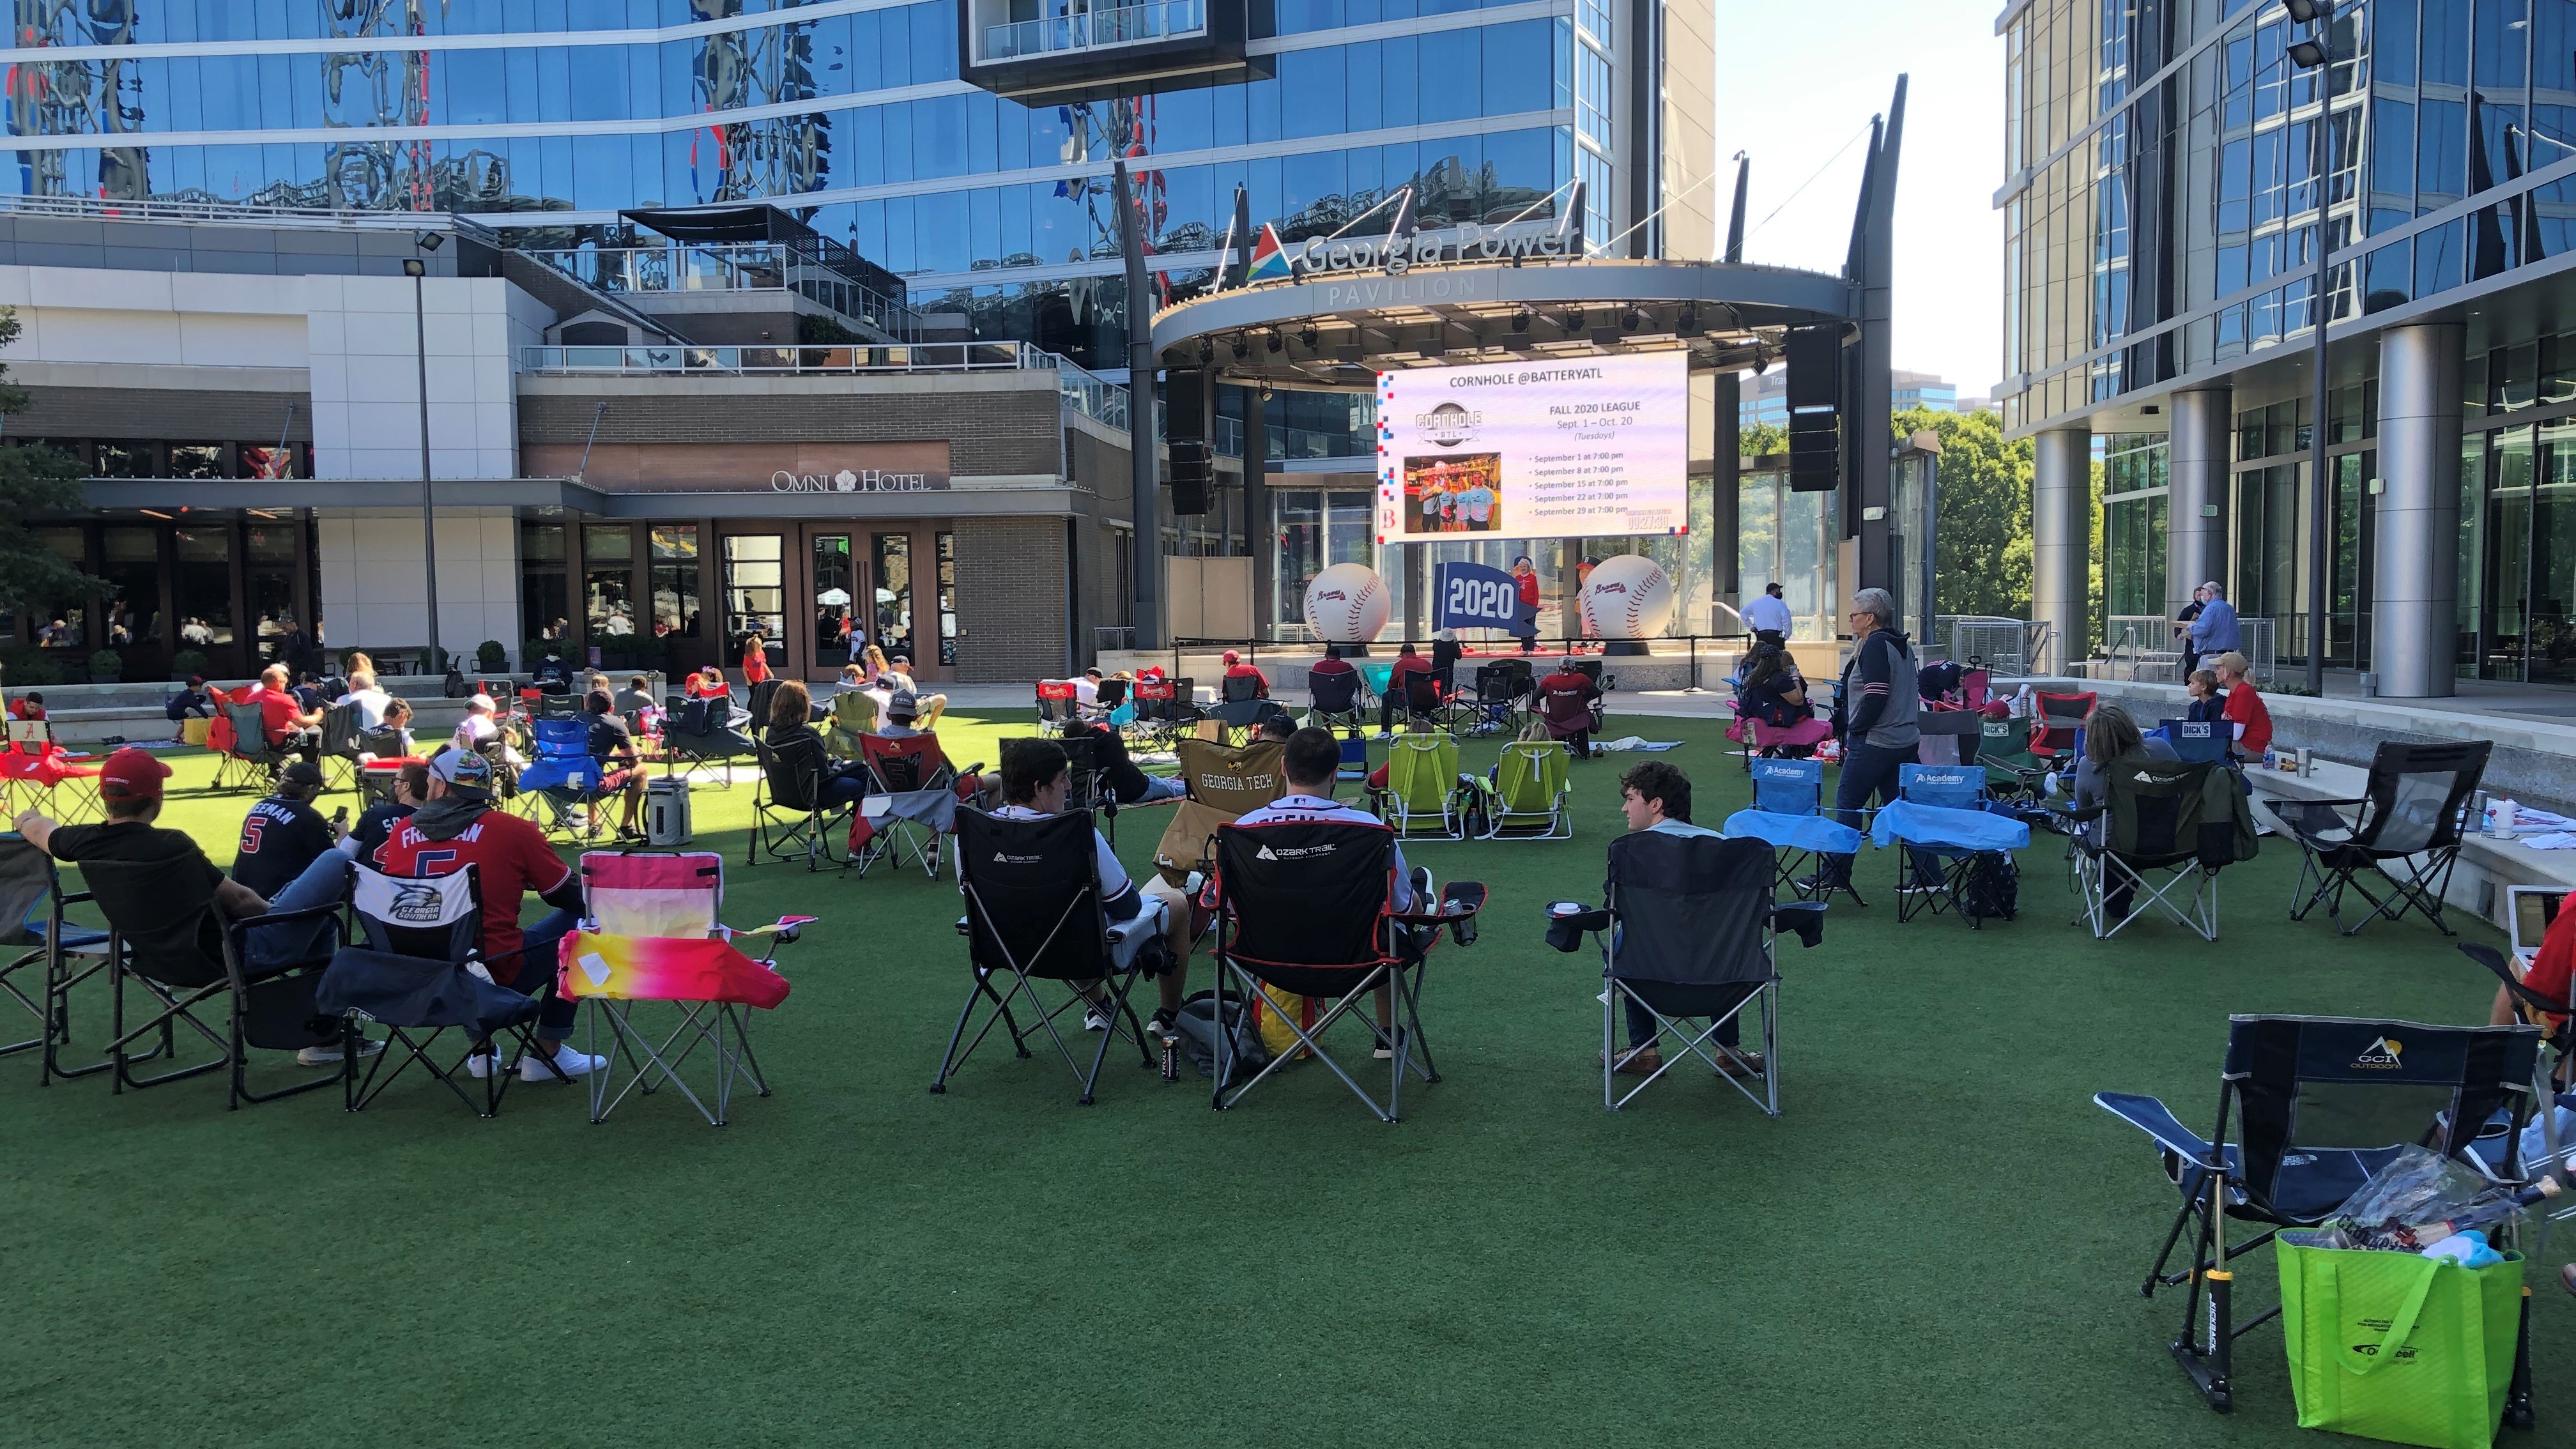 With so many choices at SunTrust Park, how fans found their spot